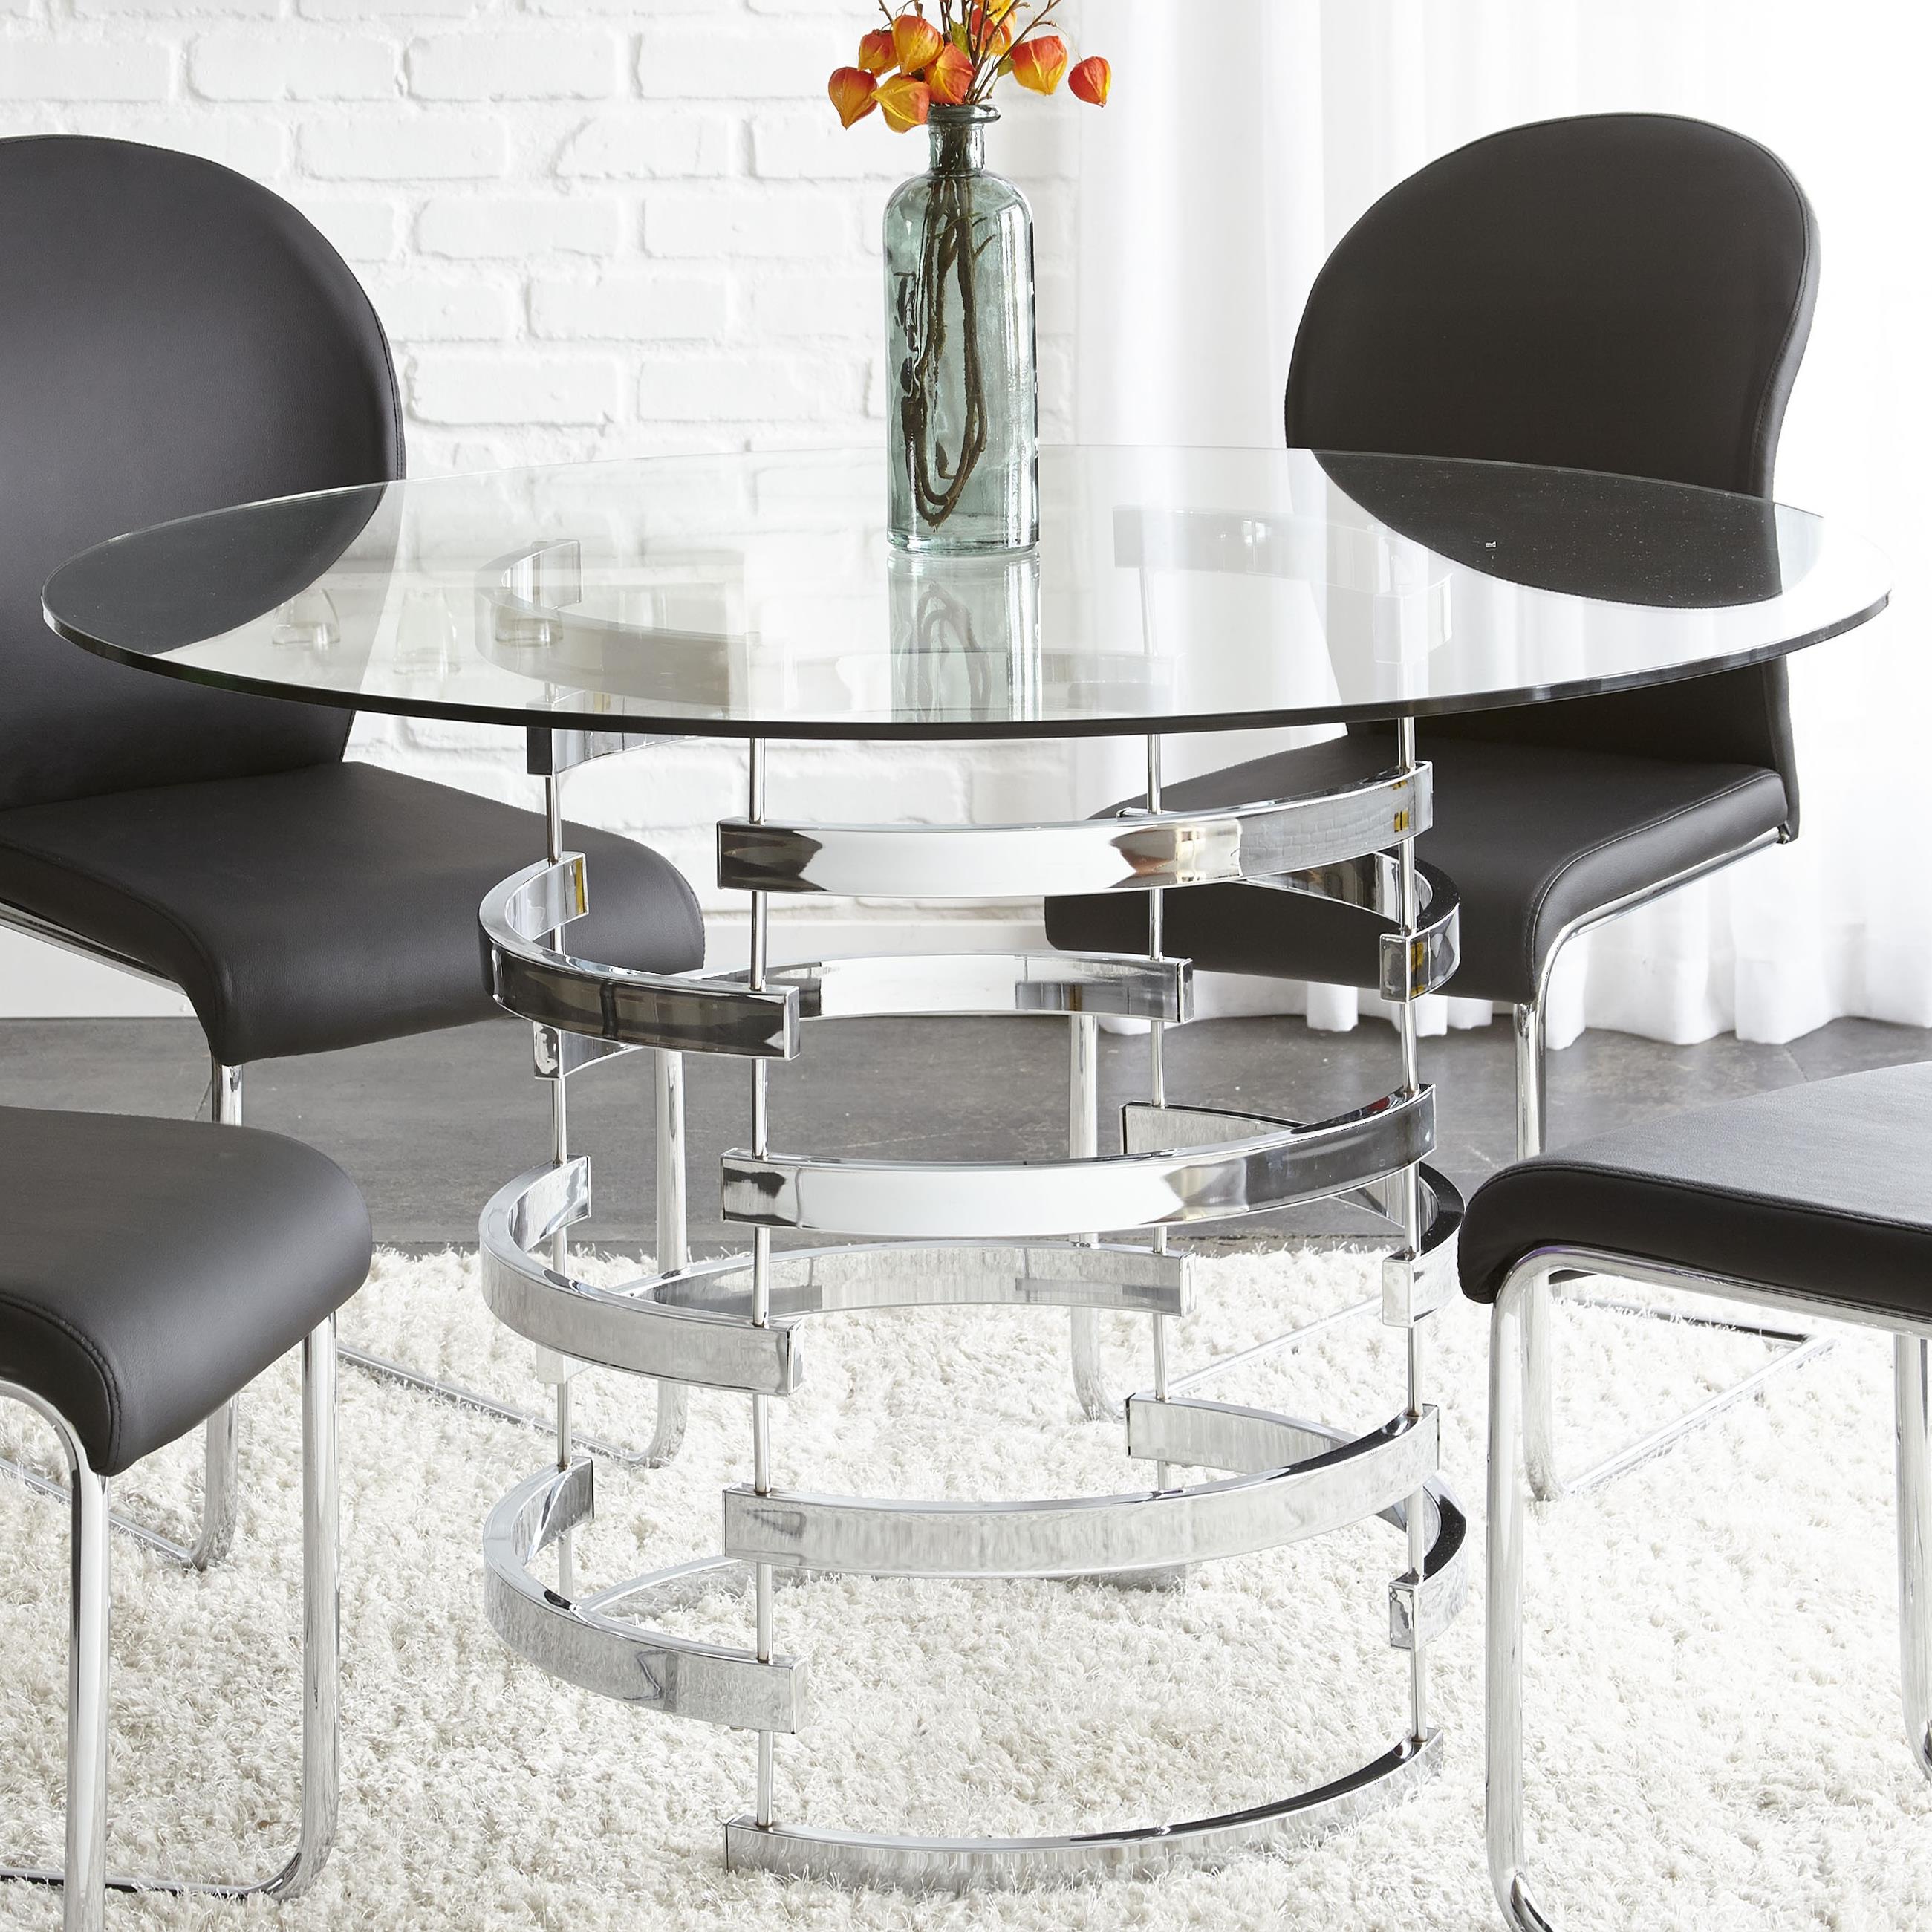 Furniture Small Round Glass Dining Table And 4 Faux Leather Chairs Chrome Legs Room Sets Home Furniture Diy Anwalt Bevensen De